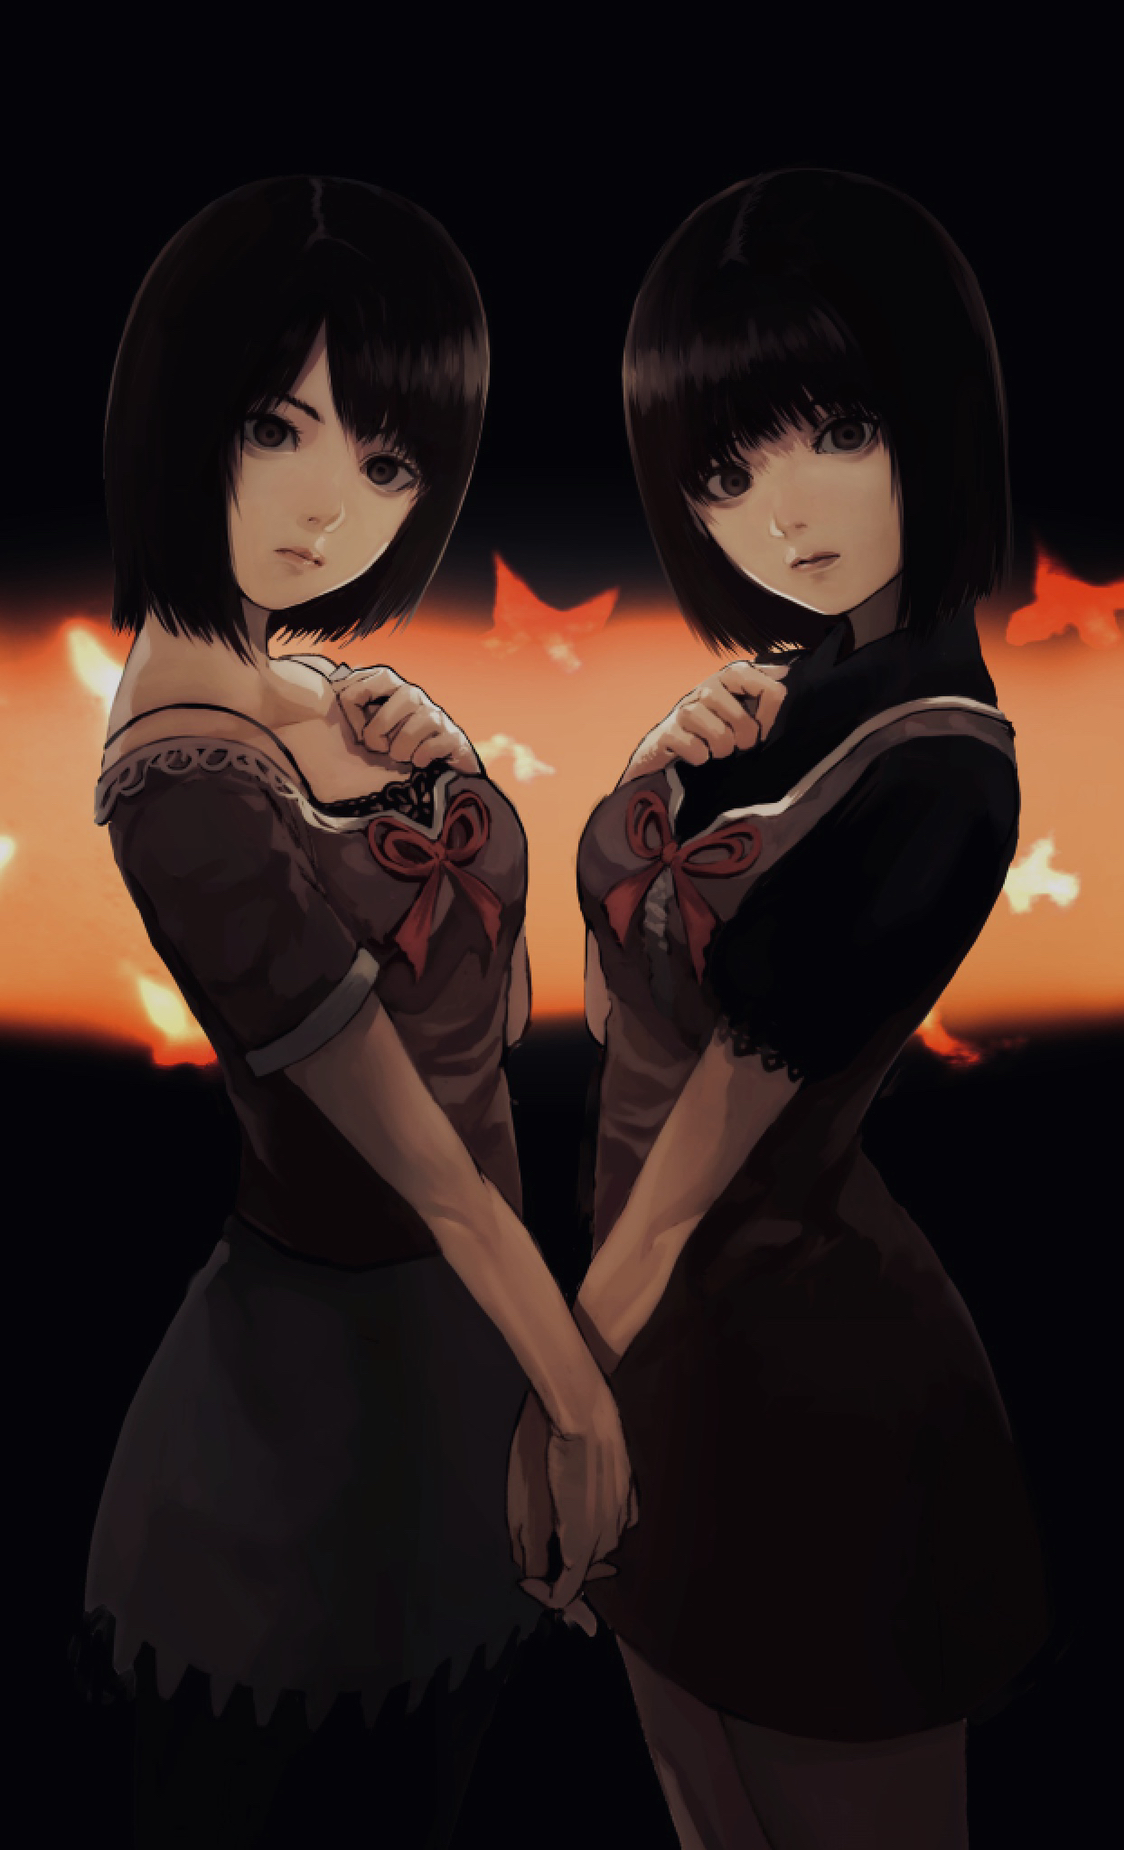 Holding Hands Twins Anime Anime Games Anime Girls Fatal Frame Project Zero Ii Crimson Butterfly Amak 1124x1850